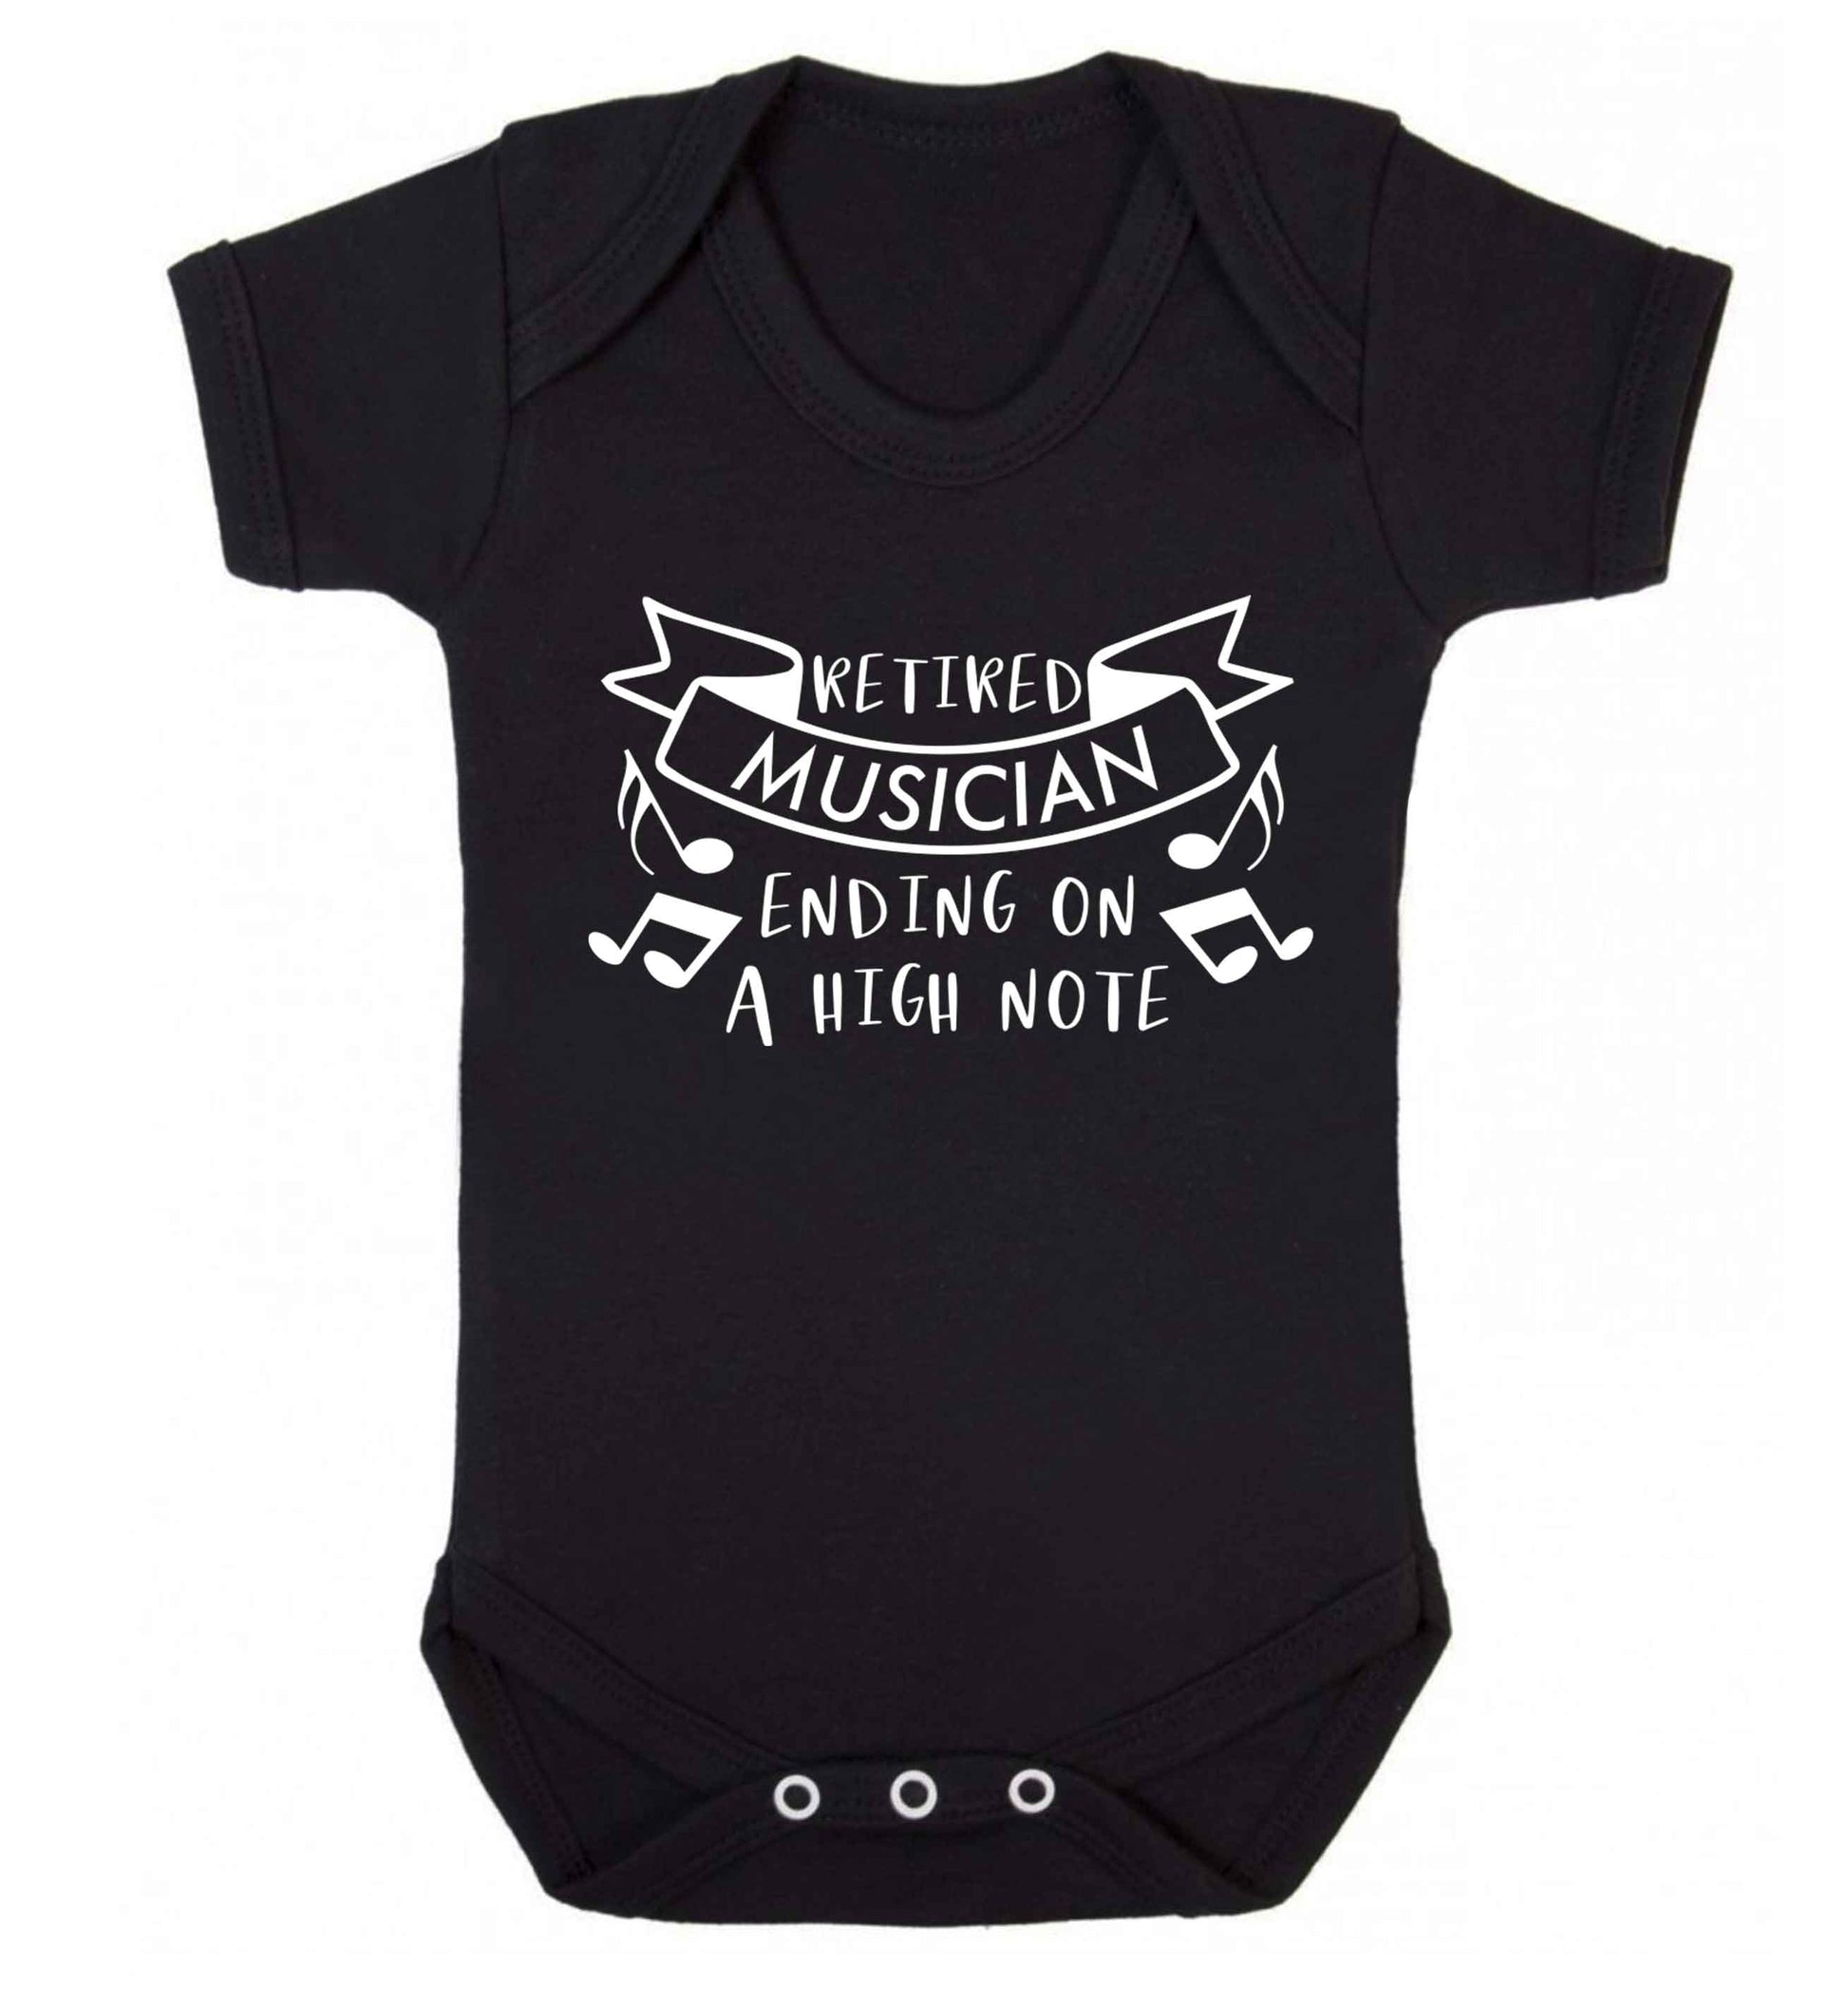 Retired musician ending on a high note Baby Vest black 18-24 months